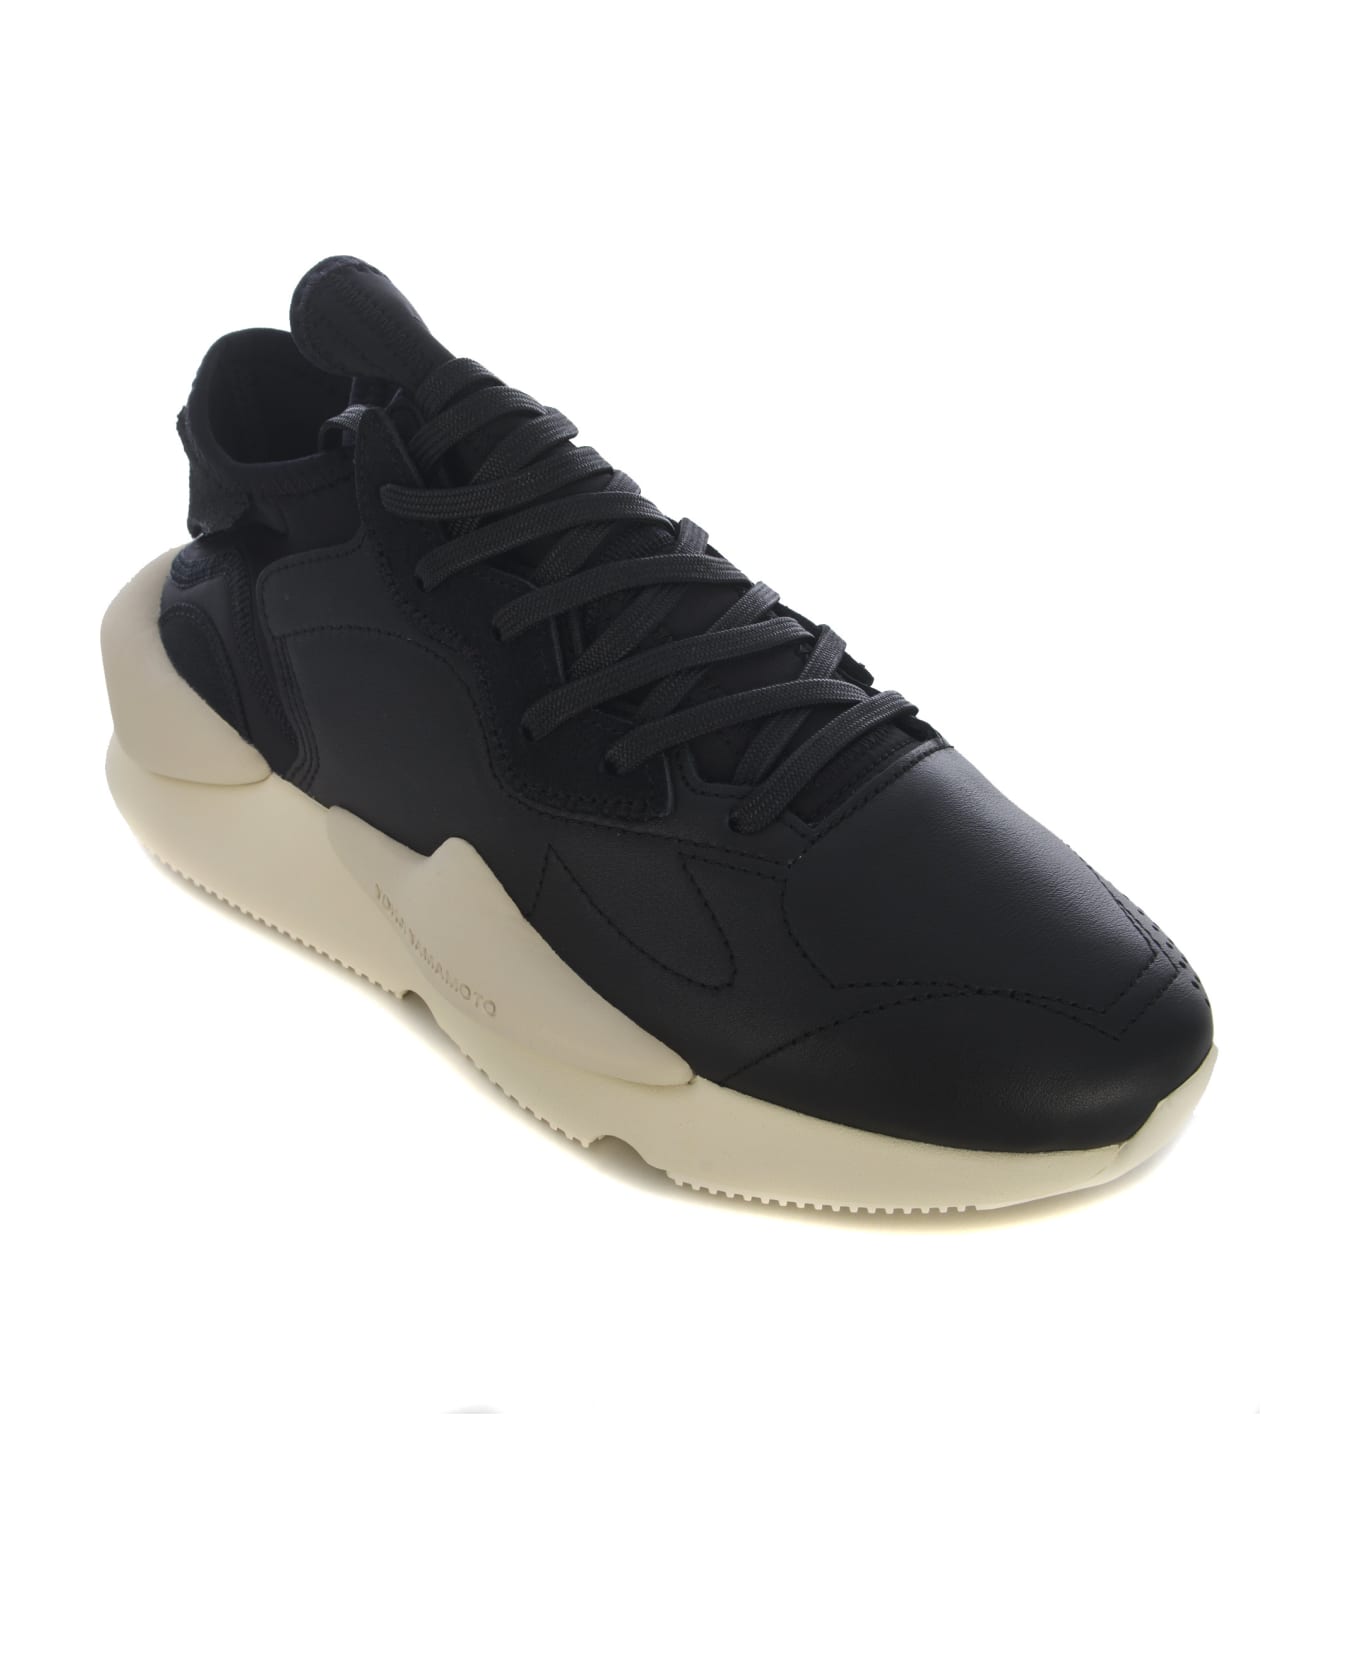 Y-3 Sneakers Y-3 "kaiwa" Made With Leather Upper - Nero スニーカー